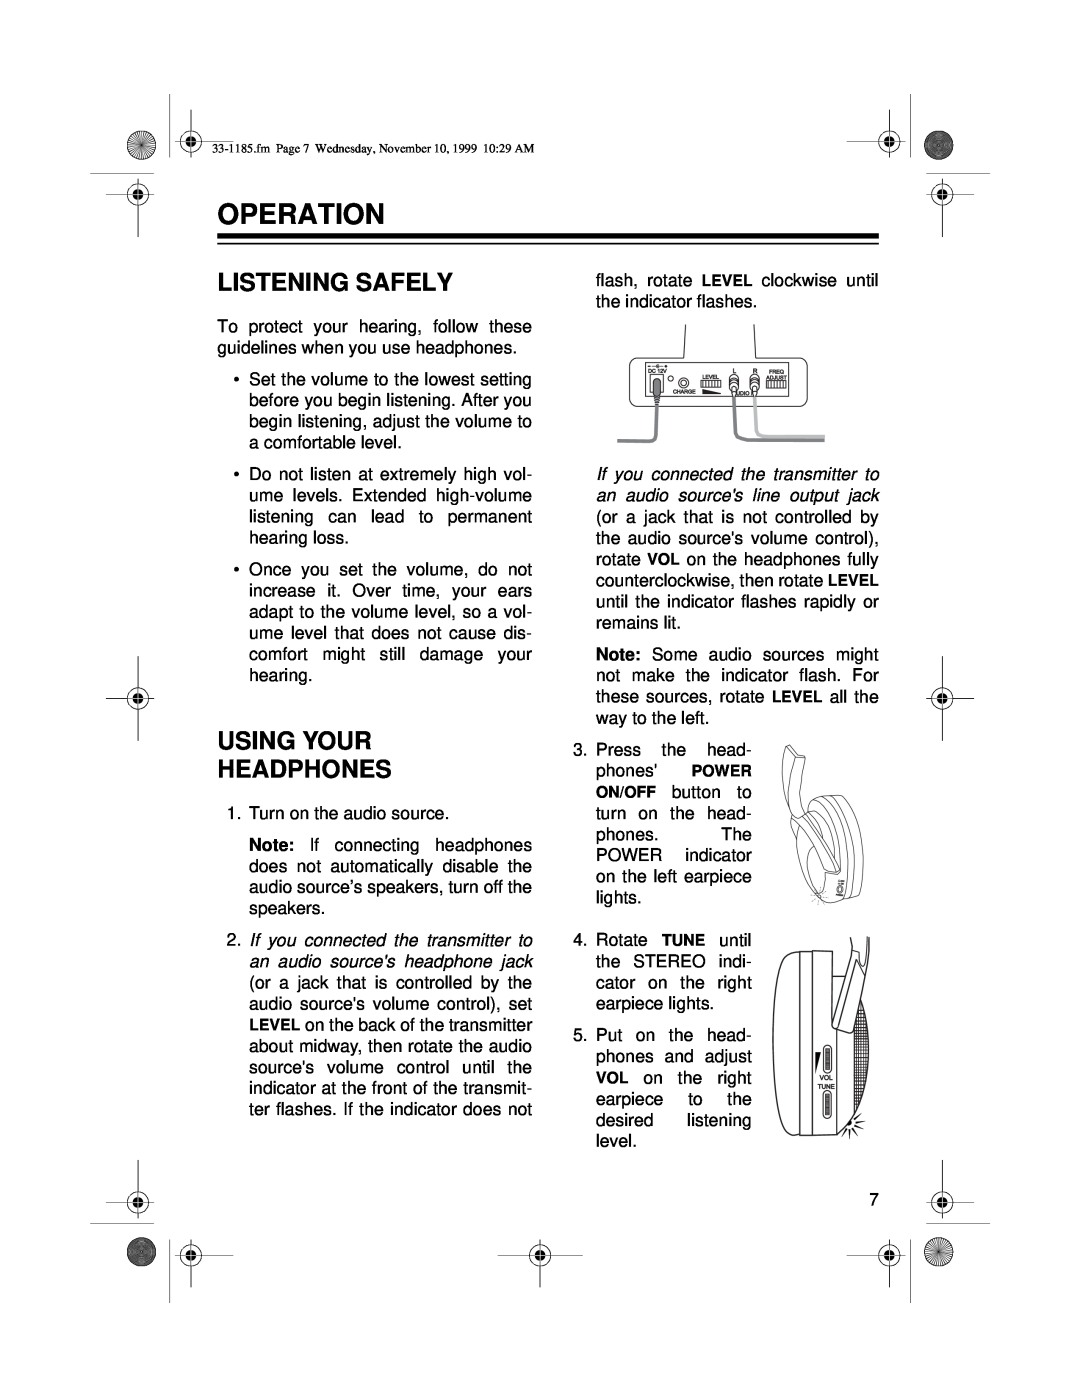 Radio Shack 33-1185 owner manual Operation, Listening Safely, Using Your Headphones 